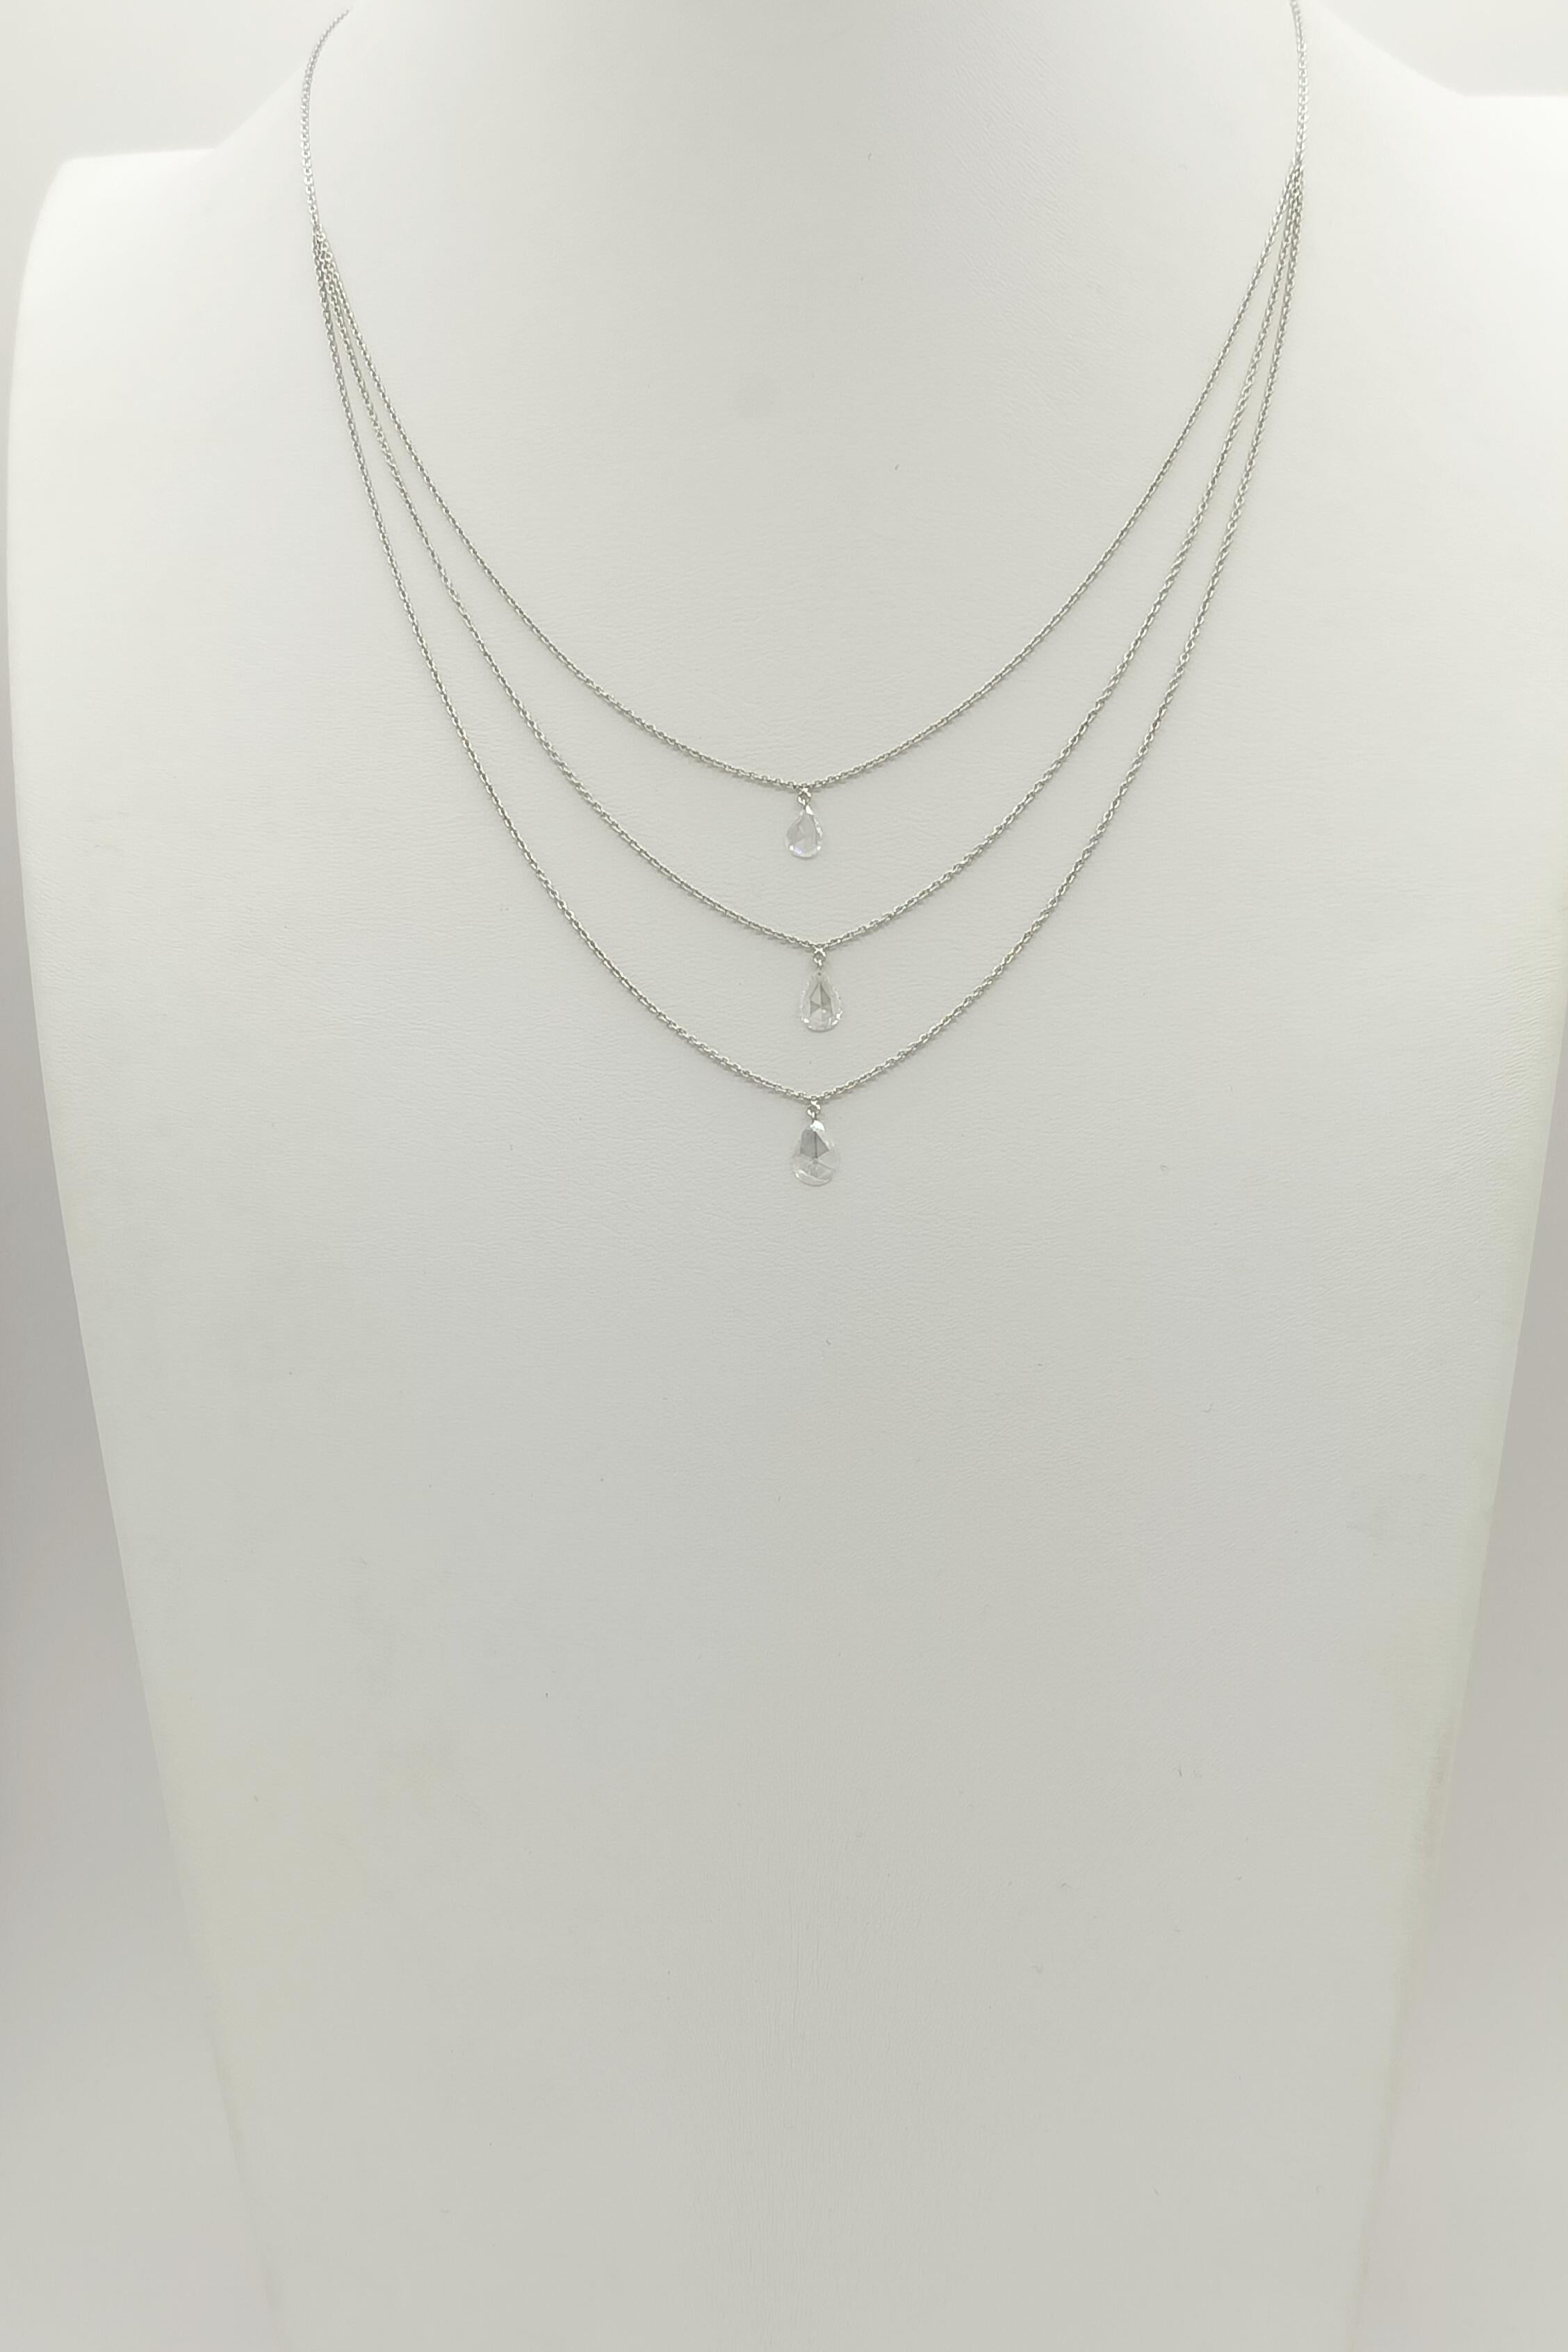 White Diamond 3 Layer Rose Cut Diamond Necklace in 18K White Gold In New Condition For Sale In Los Angeles, CA